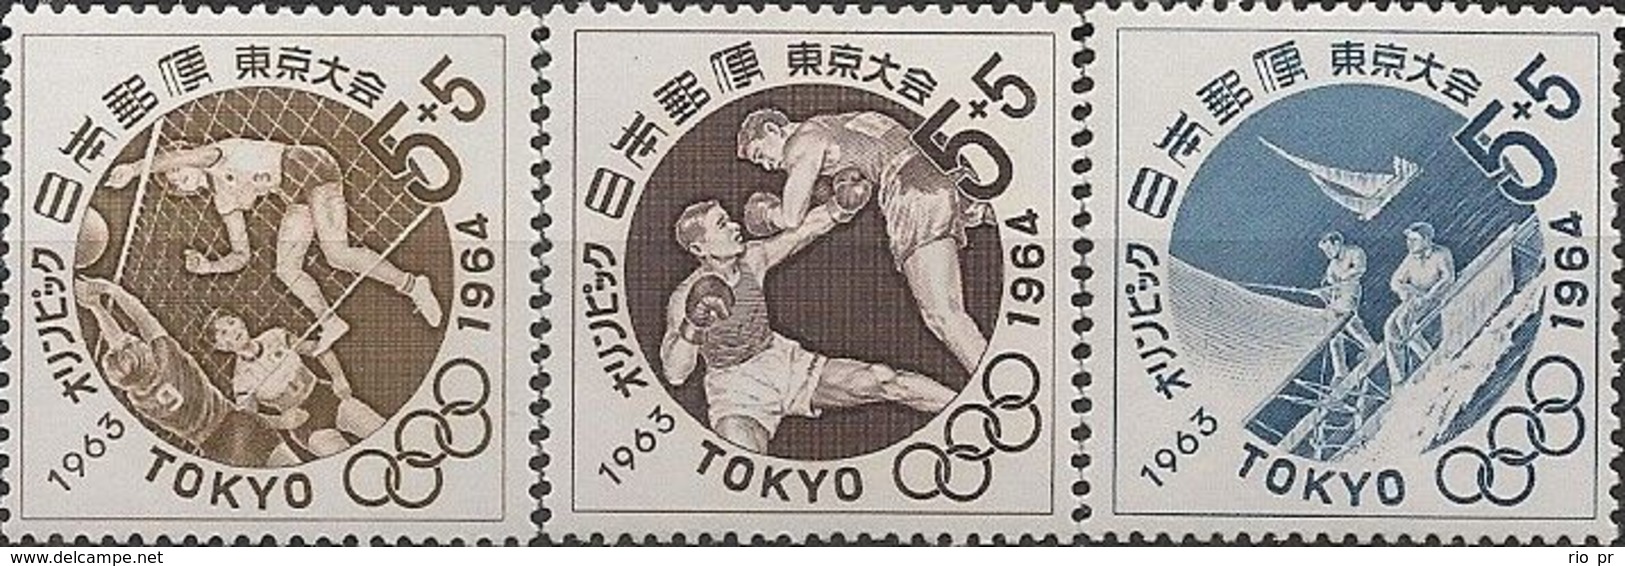 JAPAN - COMPLETE SET TOKYO'64 SUMMER OLYMPIC GAMES (4th ISSUE) 1963 - MNH - Summer 1964: Tokyo